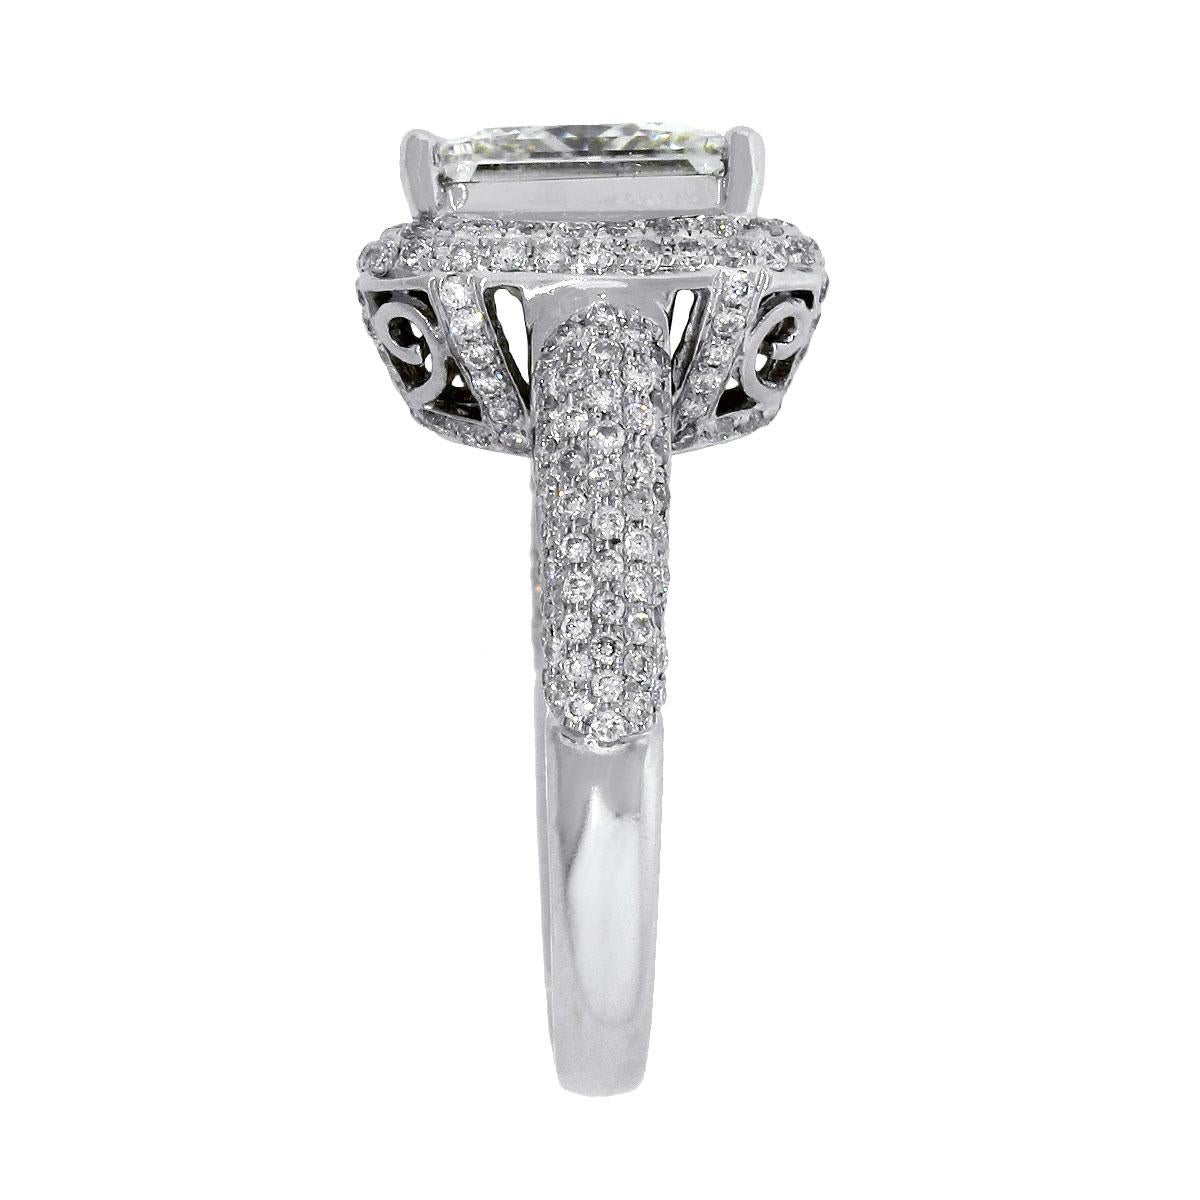 Material: 18k White Gold
Main Diamond Details: 3.37ct of Princess Cut Diamond. Diamond is K in color and SI1 in Clarity. GIA #2191329048
Adjacent Diamond Details: Approximately 1.75ctw of Pave Set Princess Cut diamonds. Diamonds are I in color and